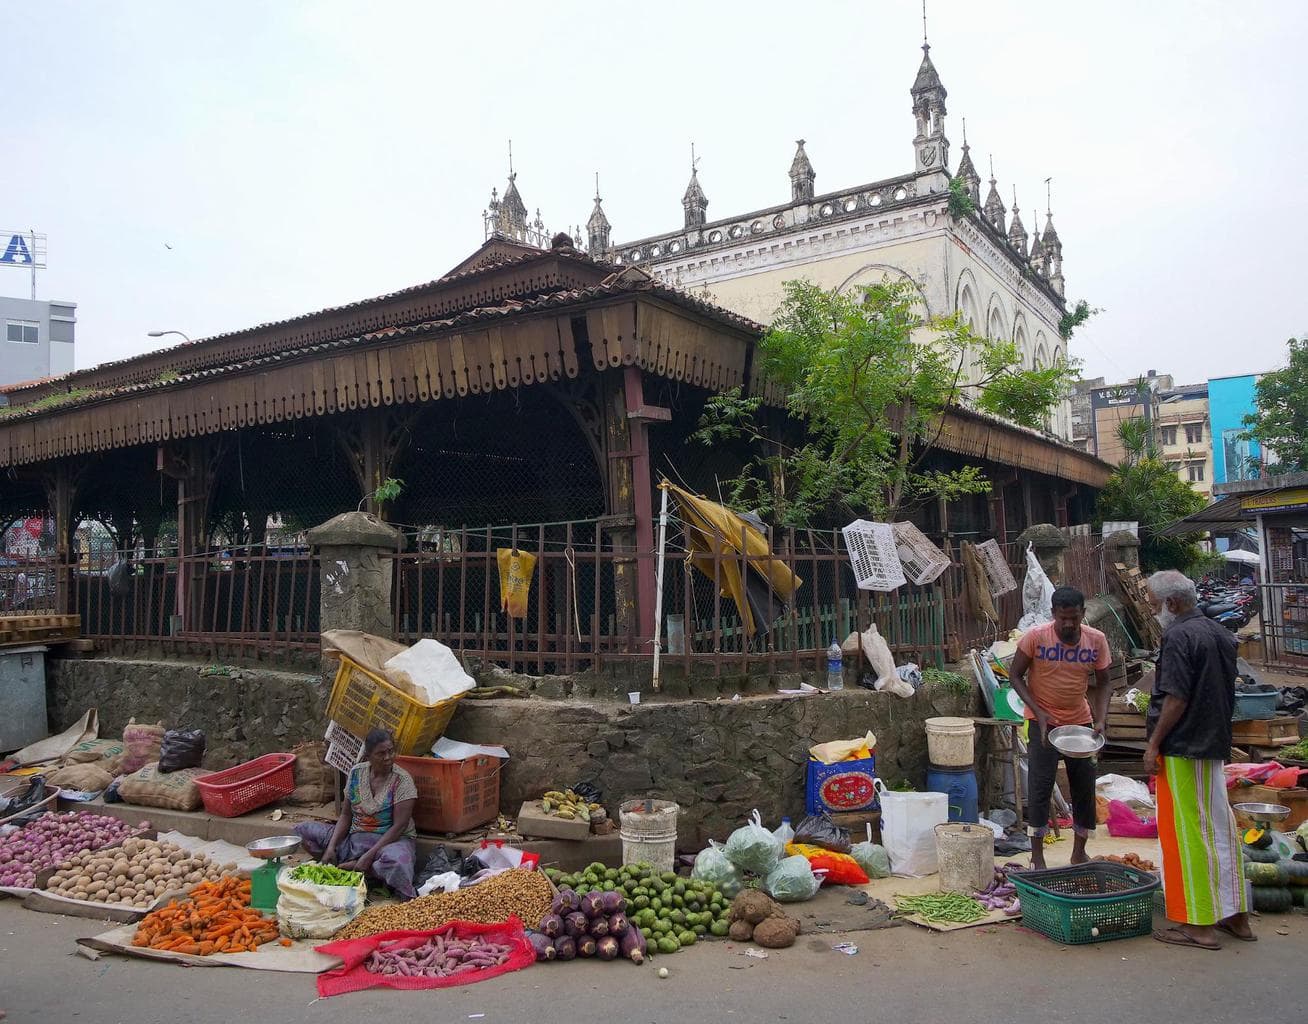 Old Town Hall Market